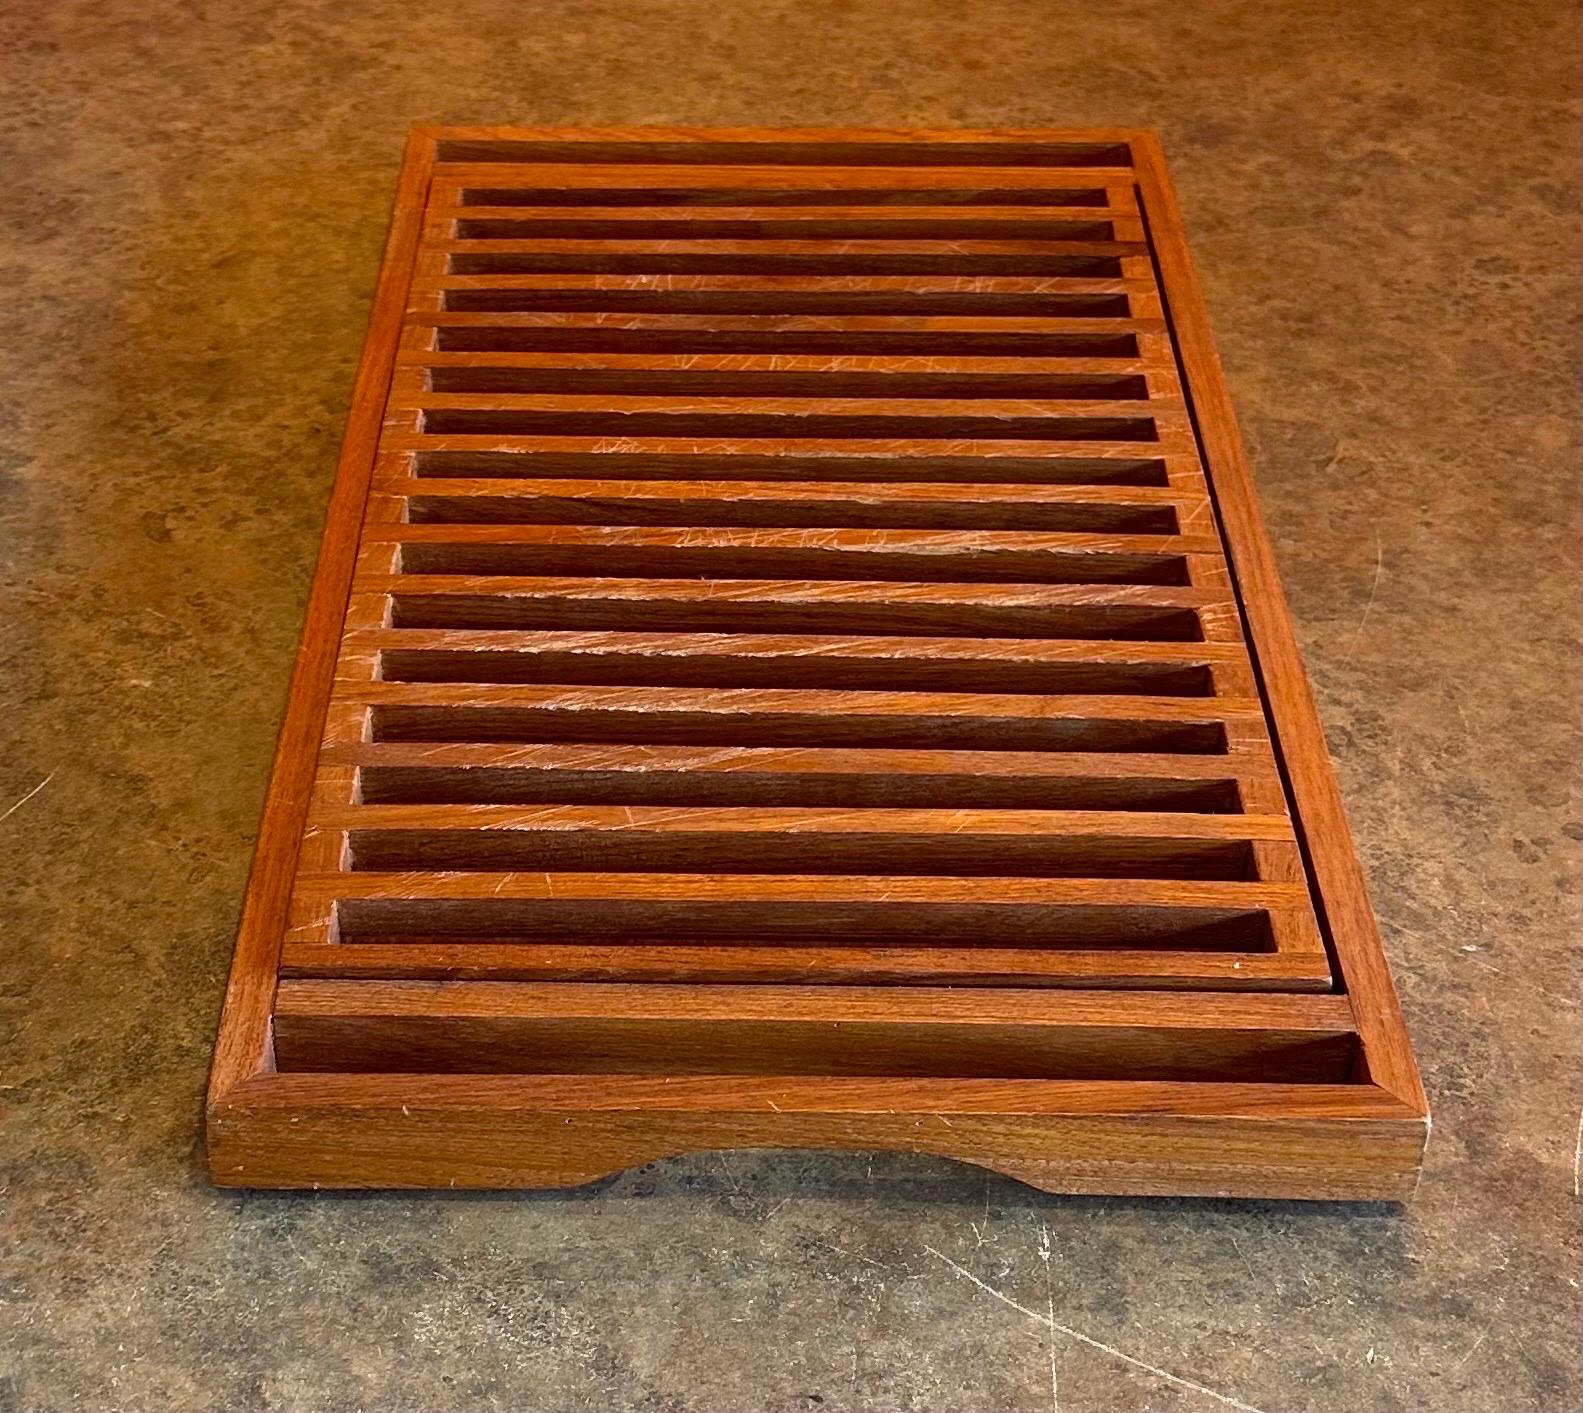 A very nice Danish modern teak bread cutting board with handles, circa 1970s. The board is in good vintage condition and measures 18